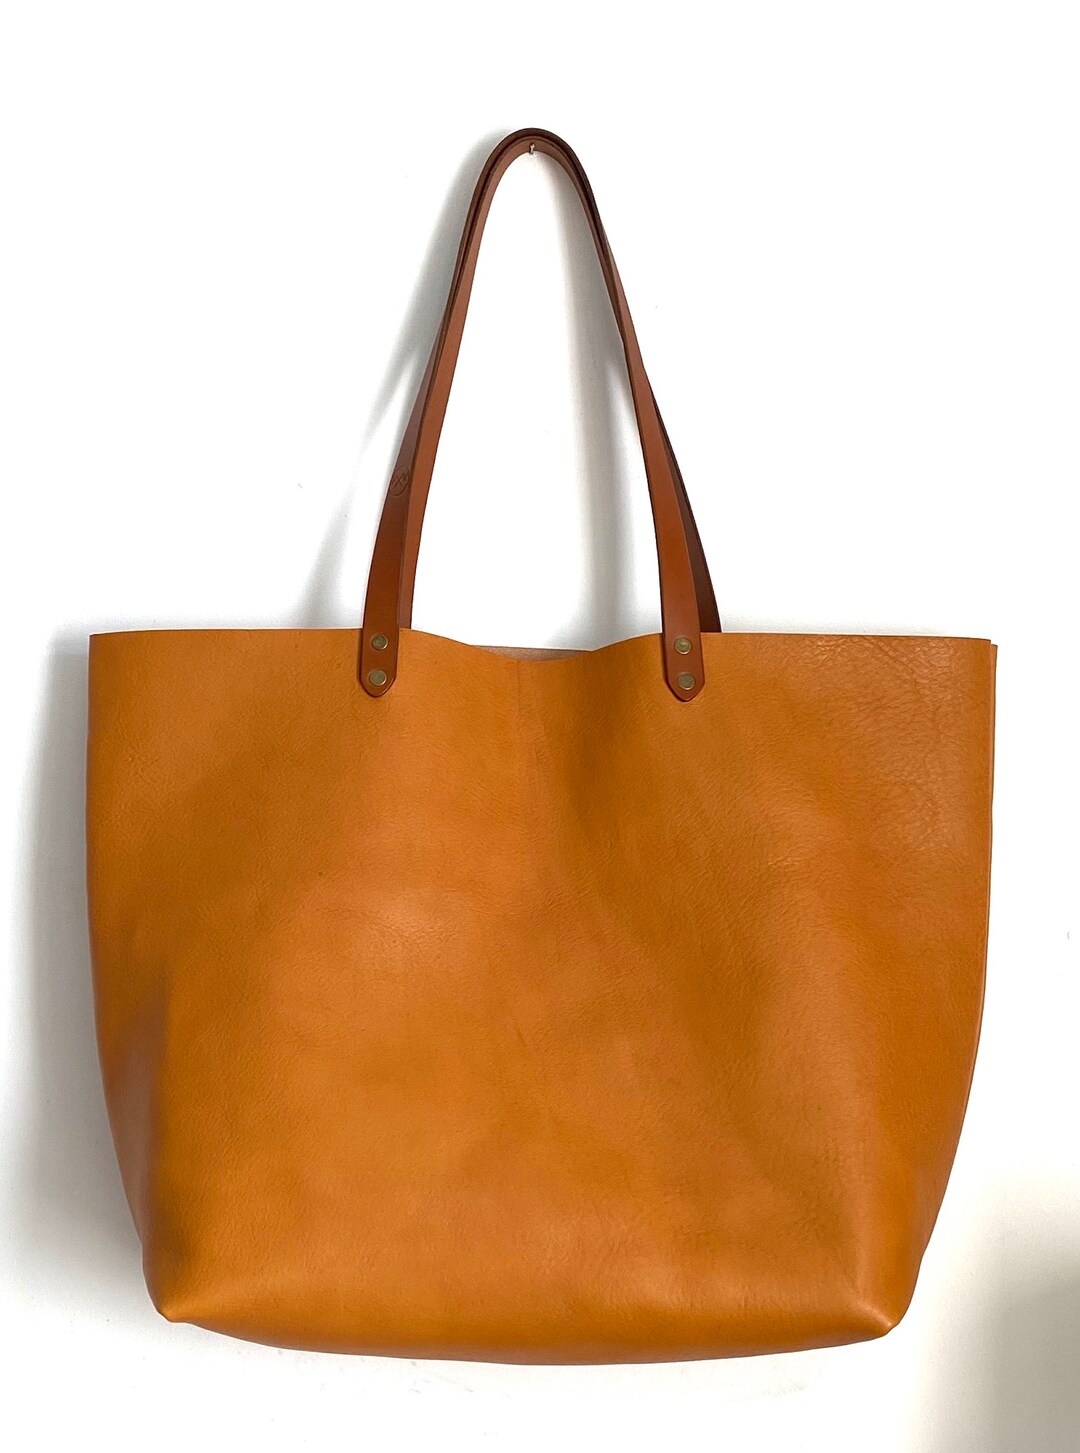 Large Tan Leather Tote Leather Weekend Bag Large Tote Bag - Etsy